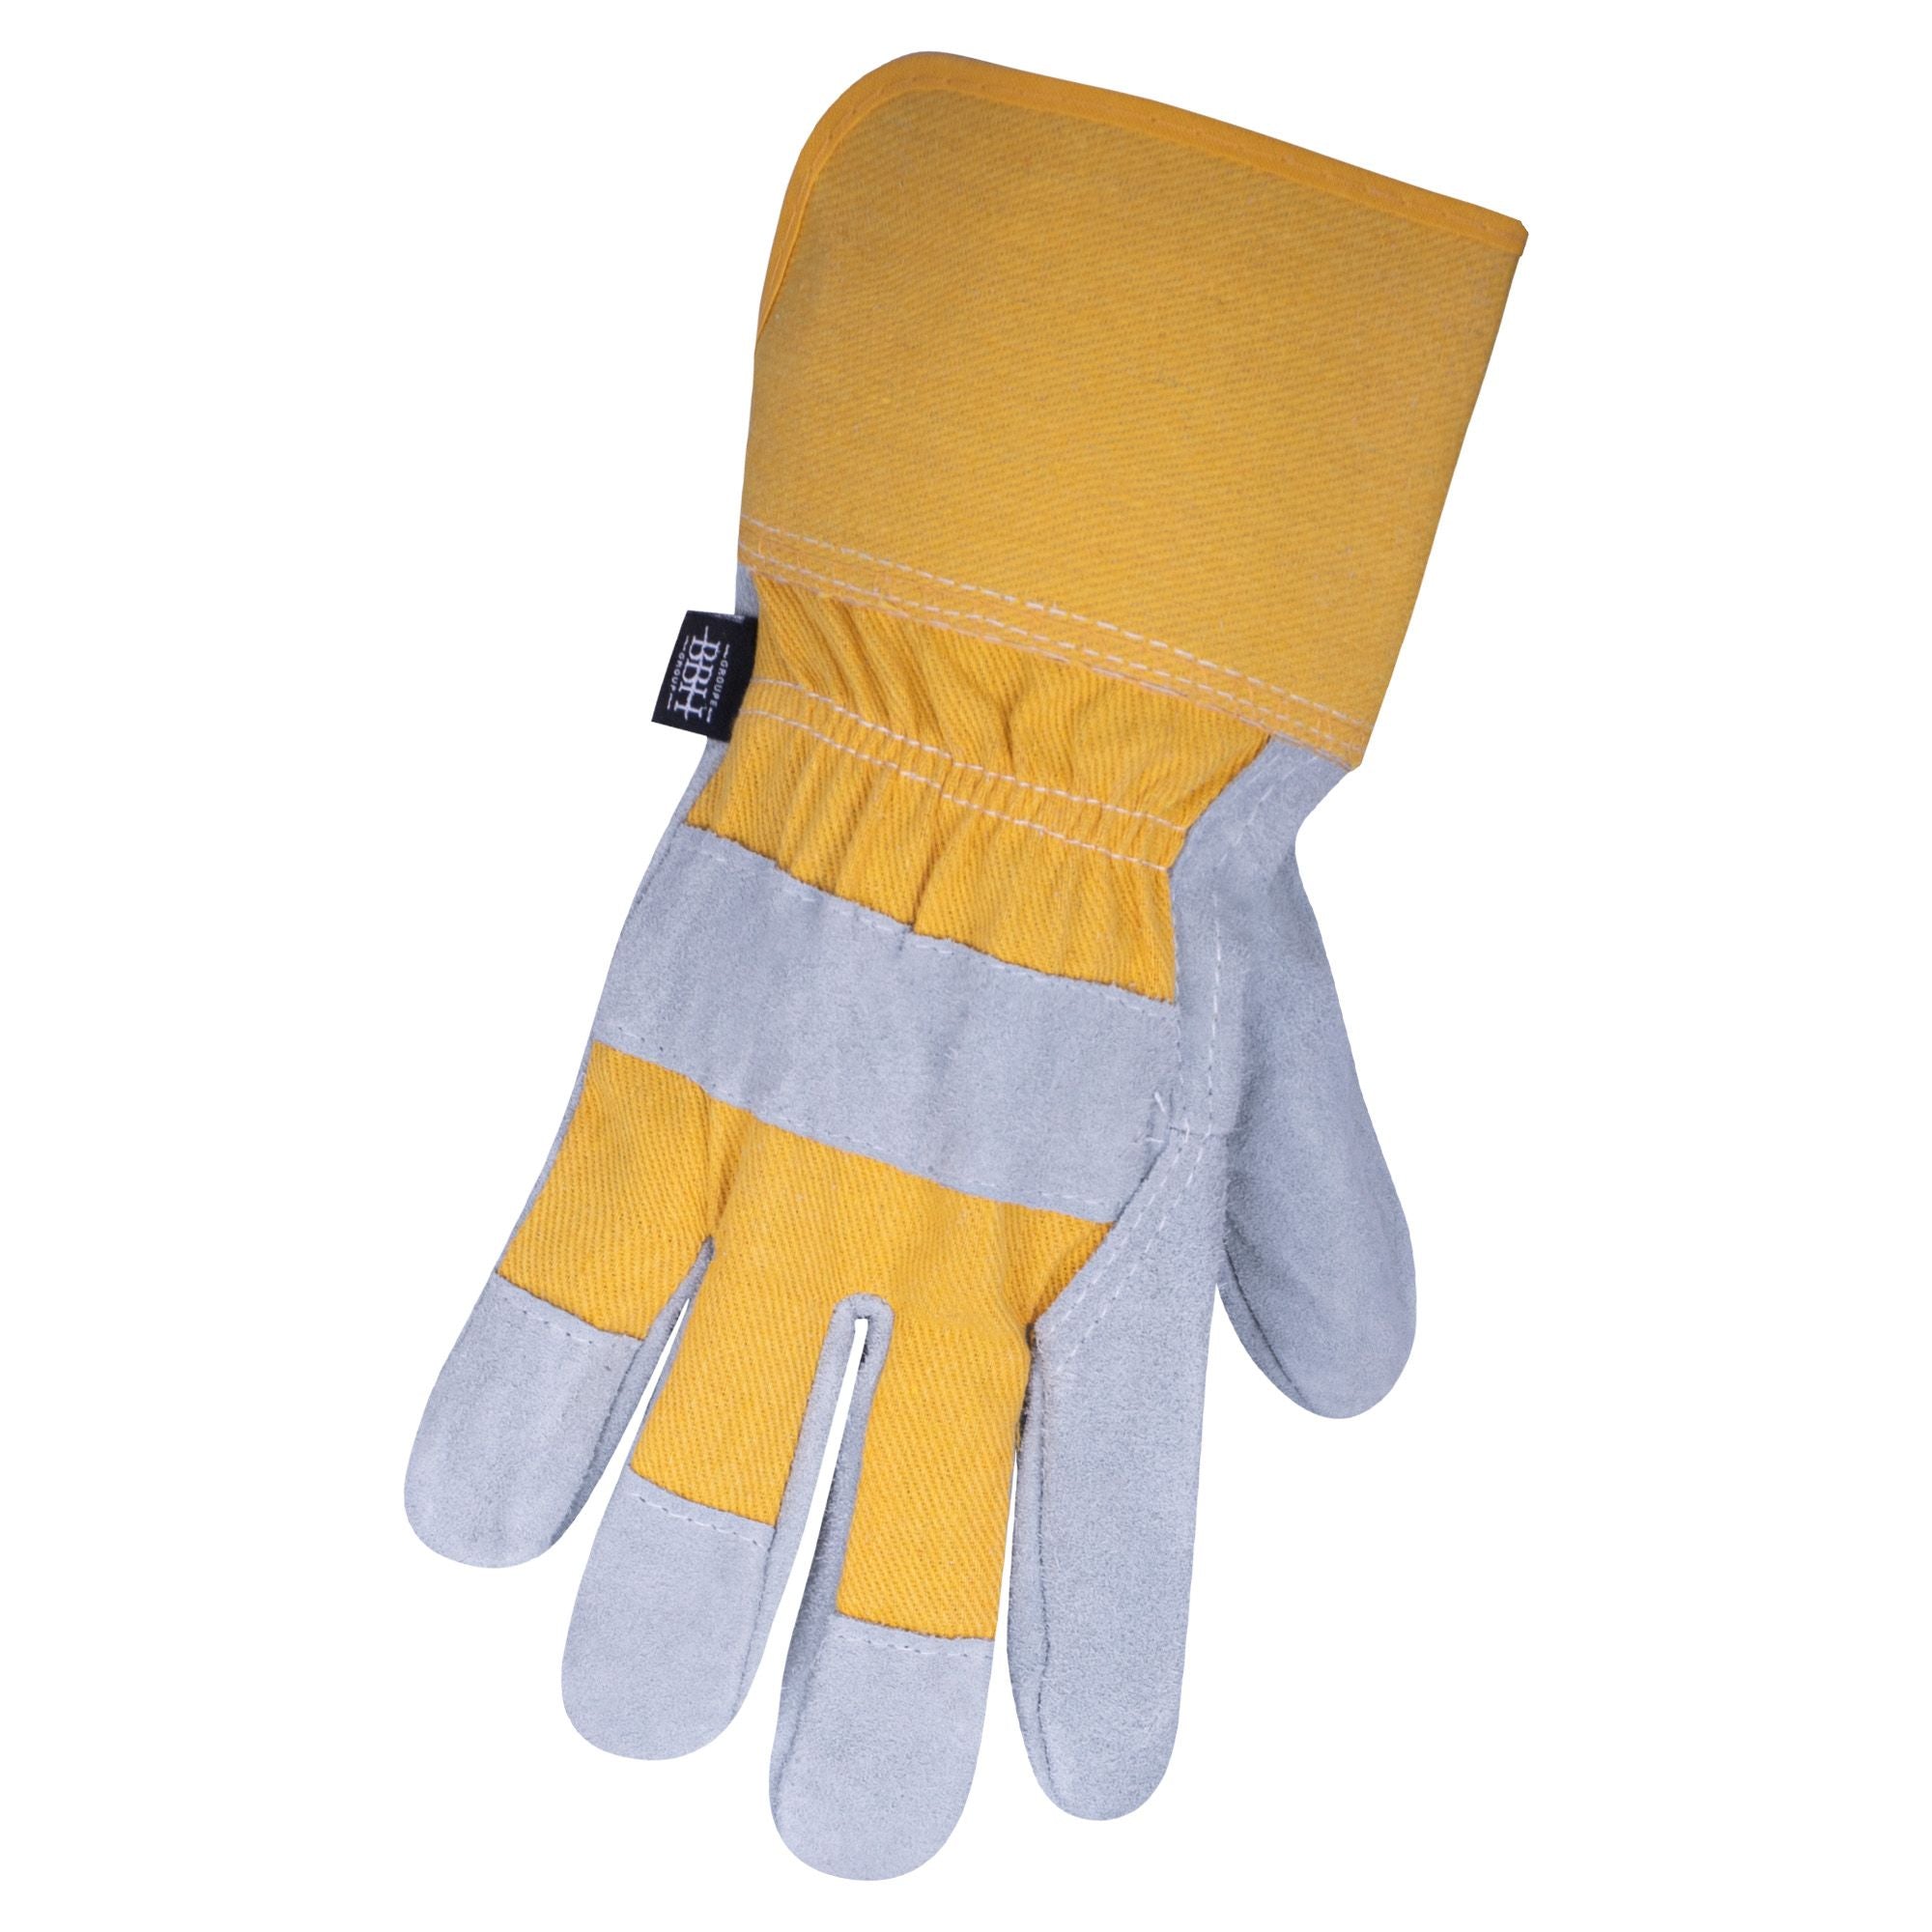 Protective gloves with cuff